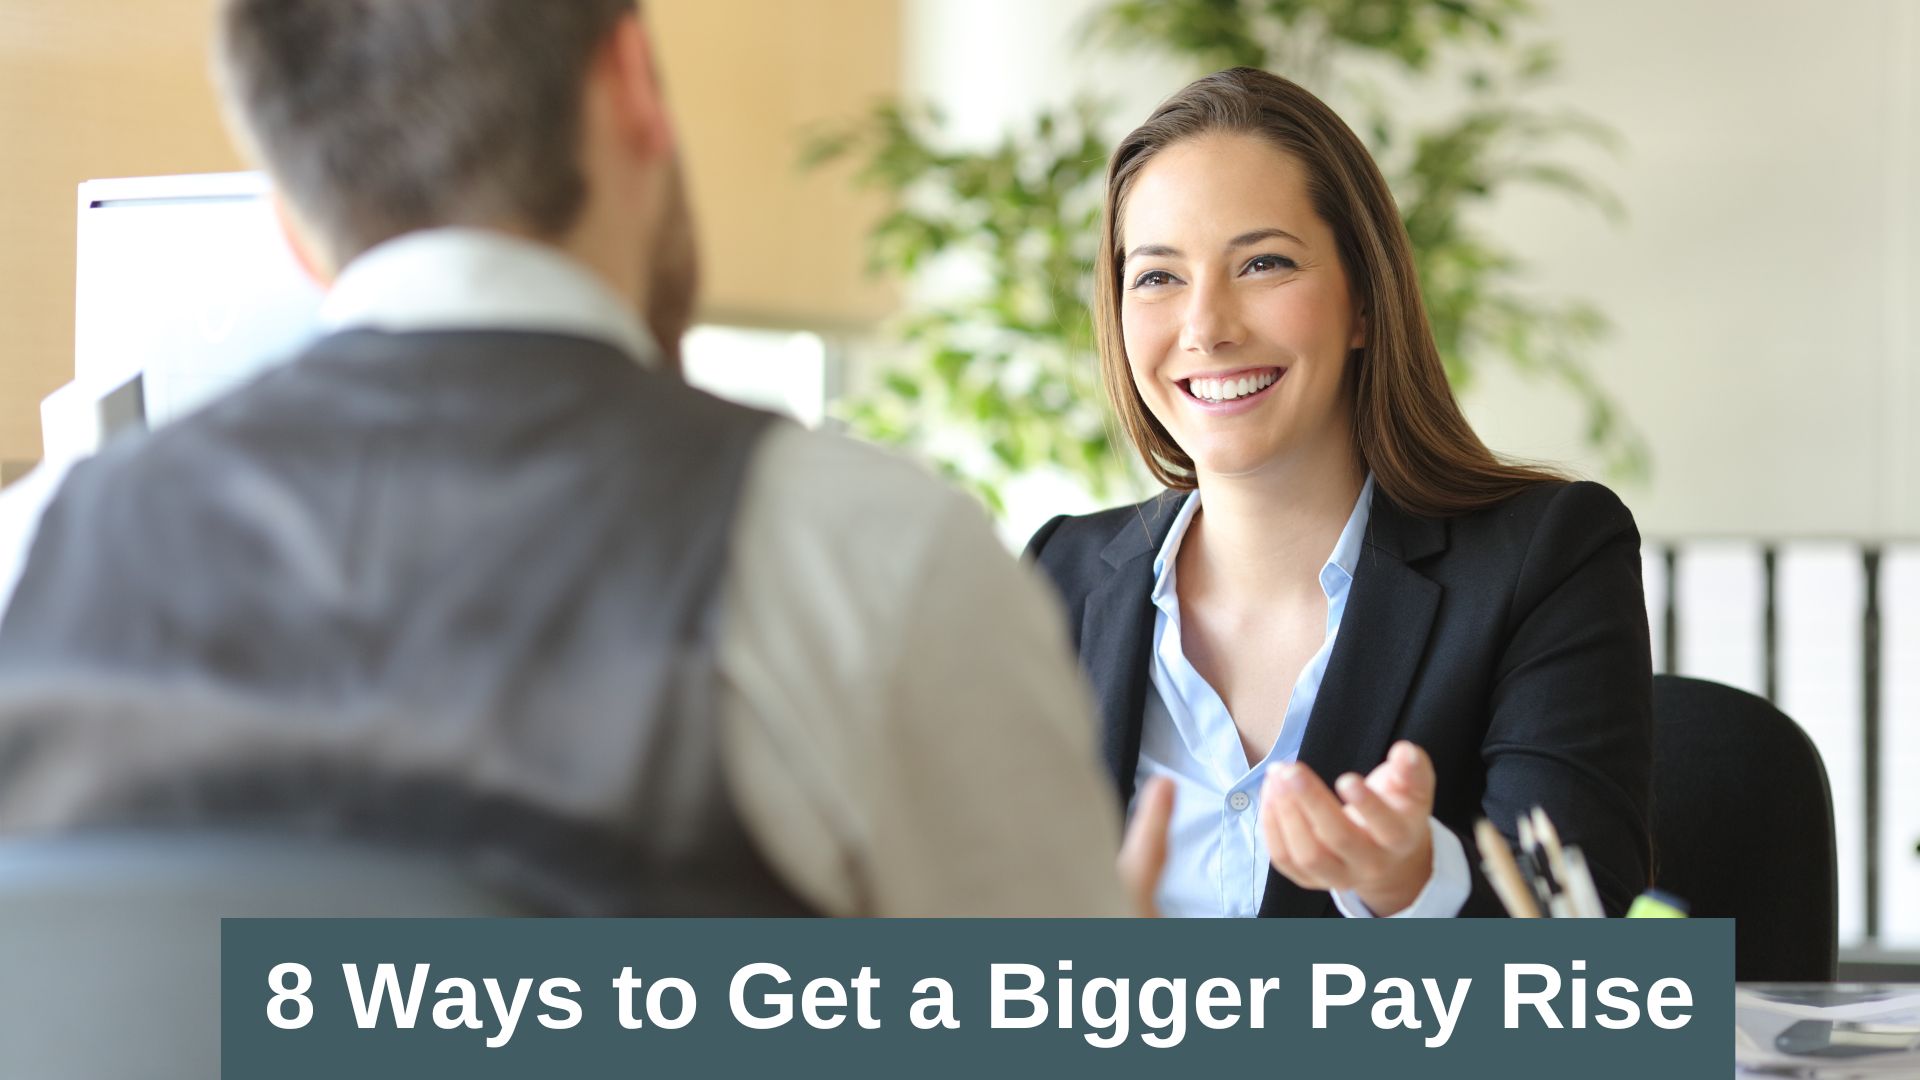 8 Ways to Get a Bigger Pay Rise